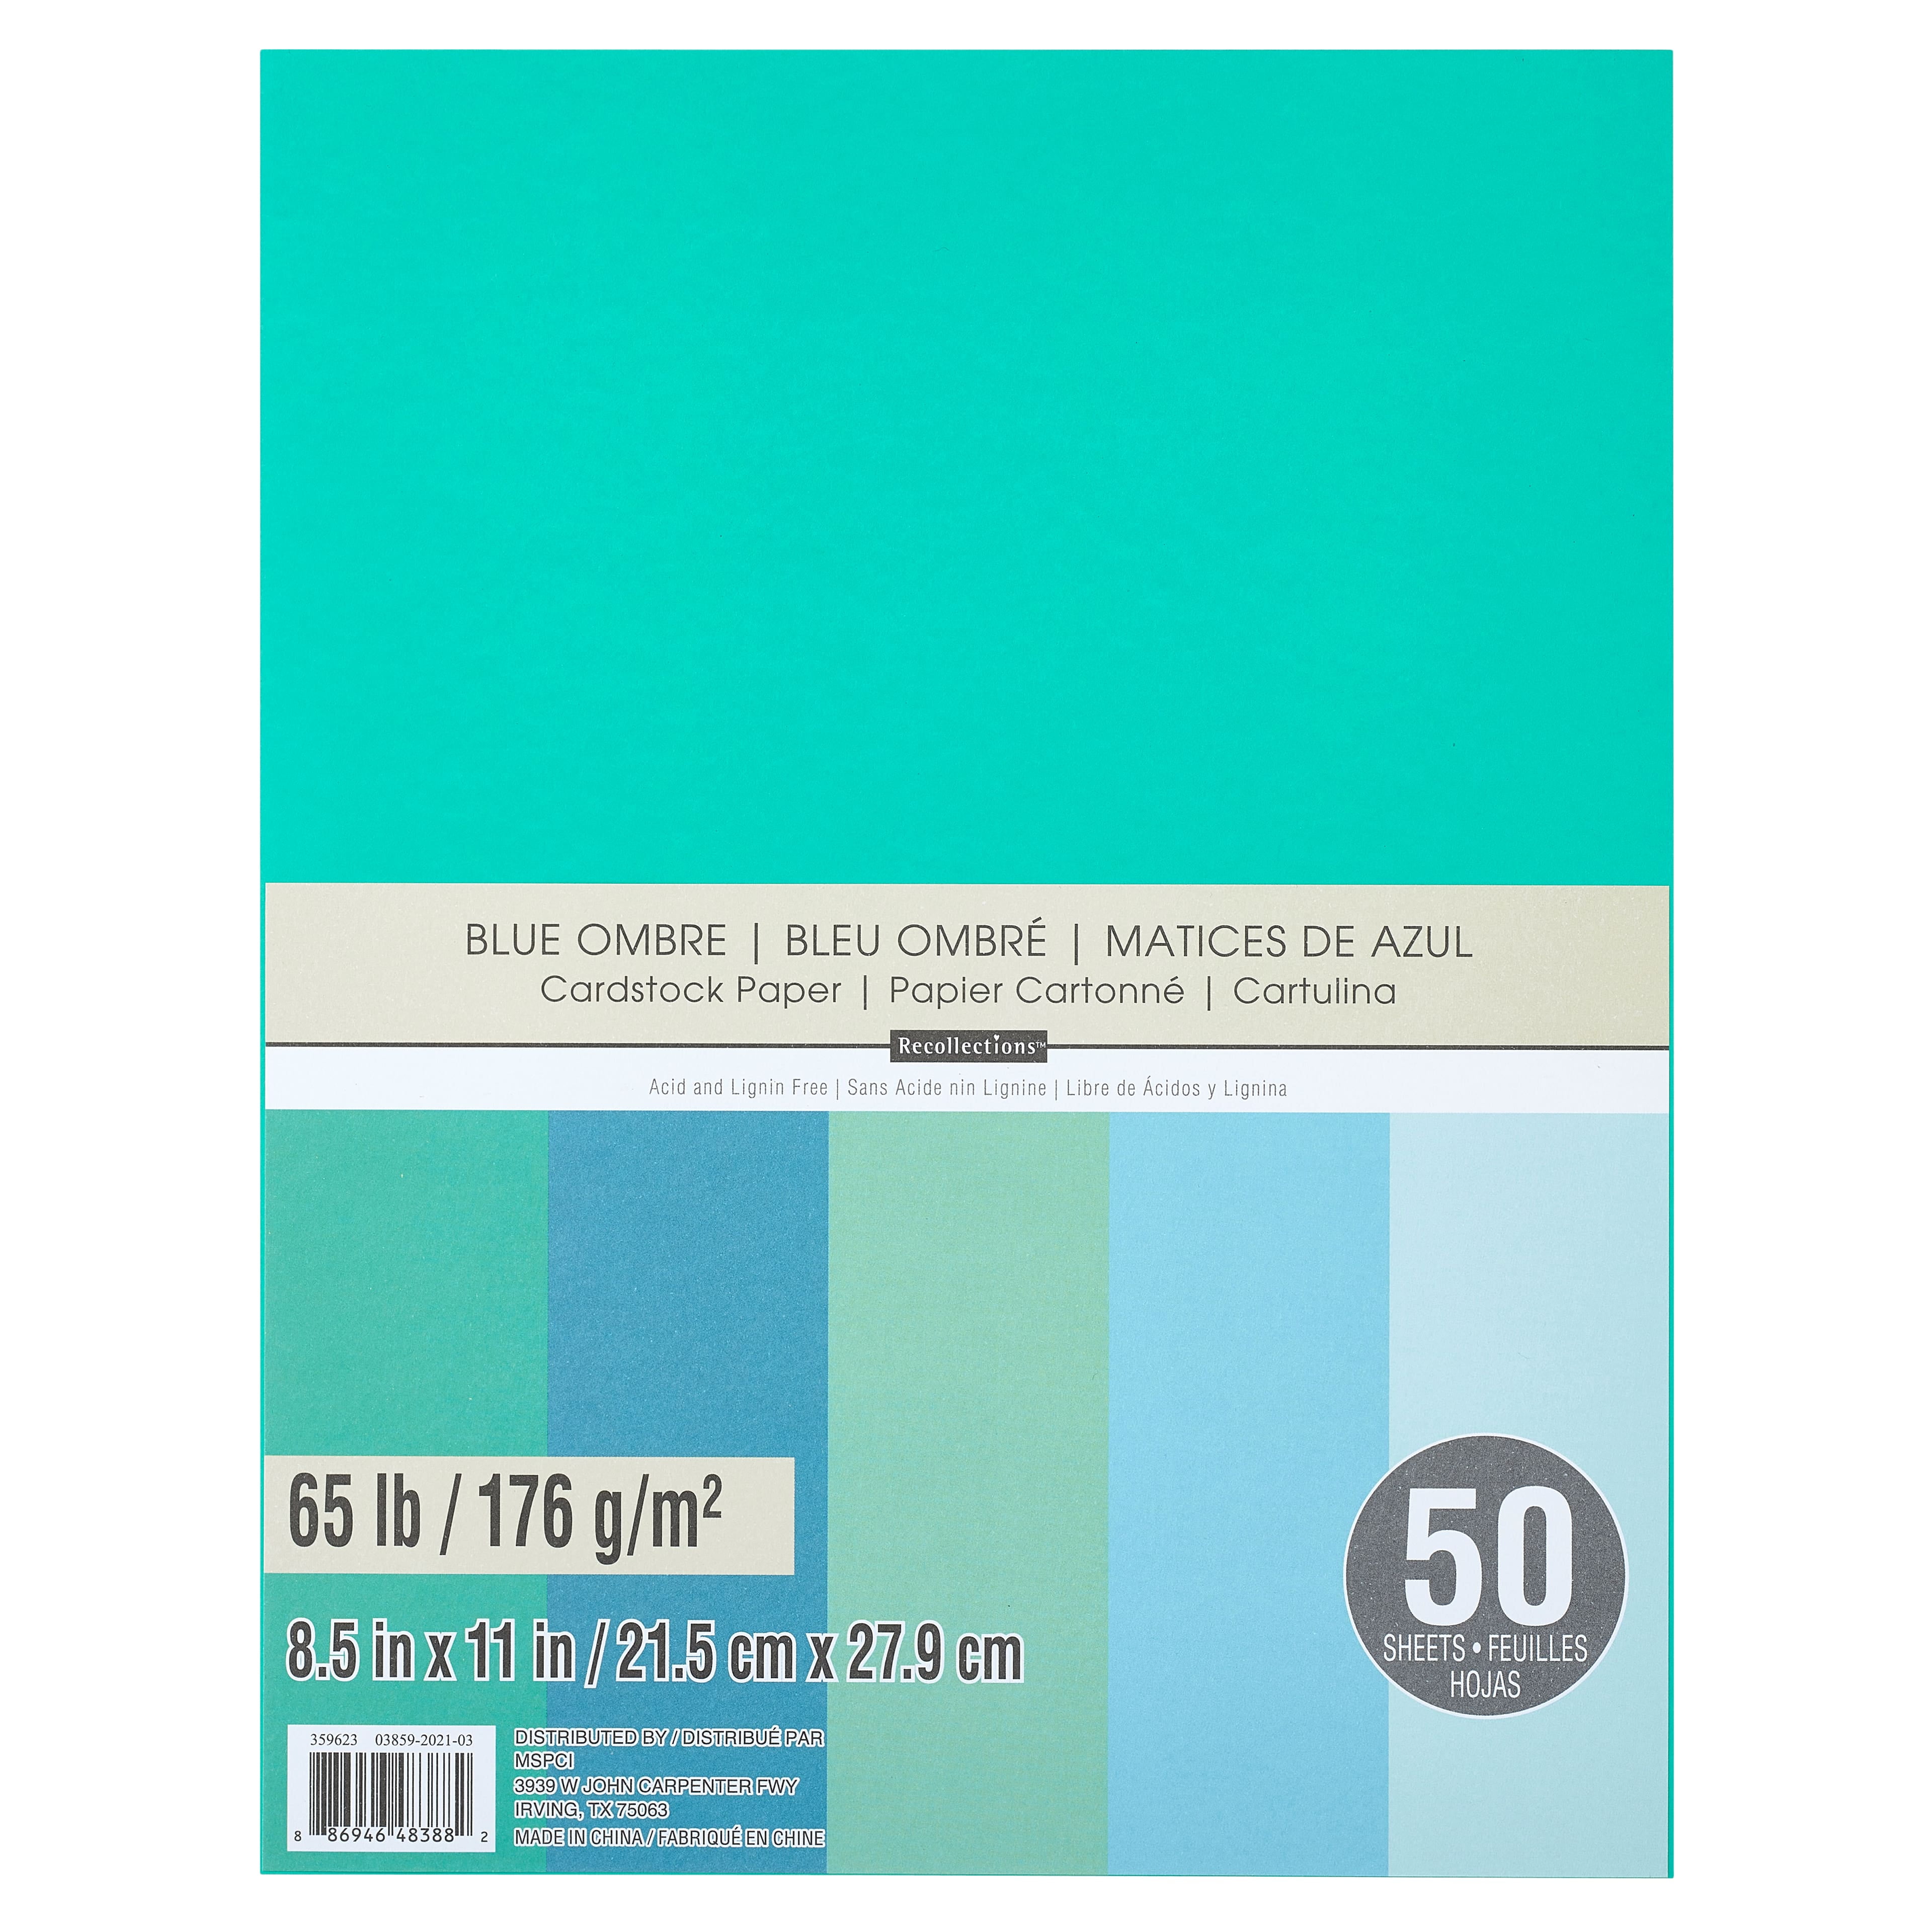  Premium Colored Cardstock Paper 8.5” x 11”, Assorted Blue  Colors, 65lb Smooth Texture, Solid Core Card Stock for Crafts and  Scrapbooking